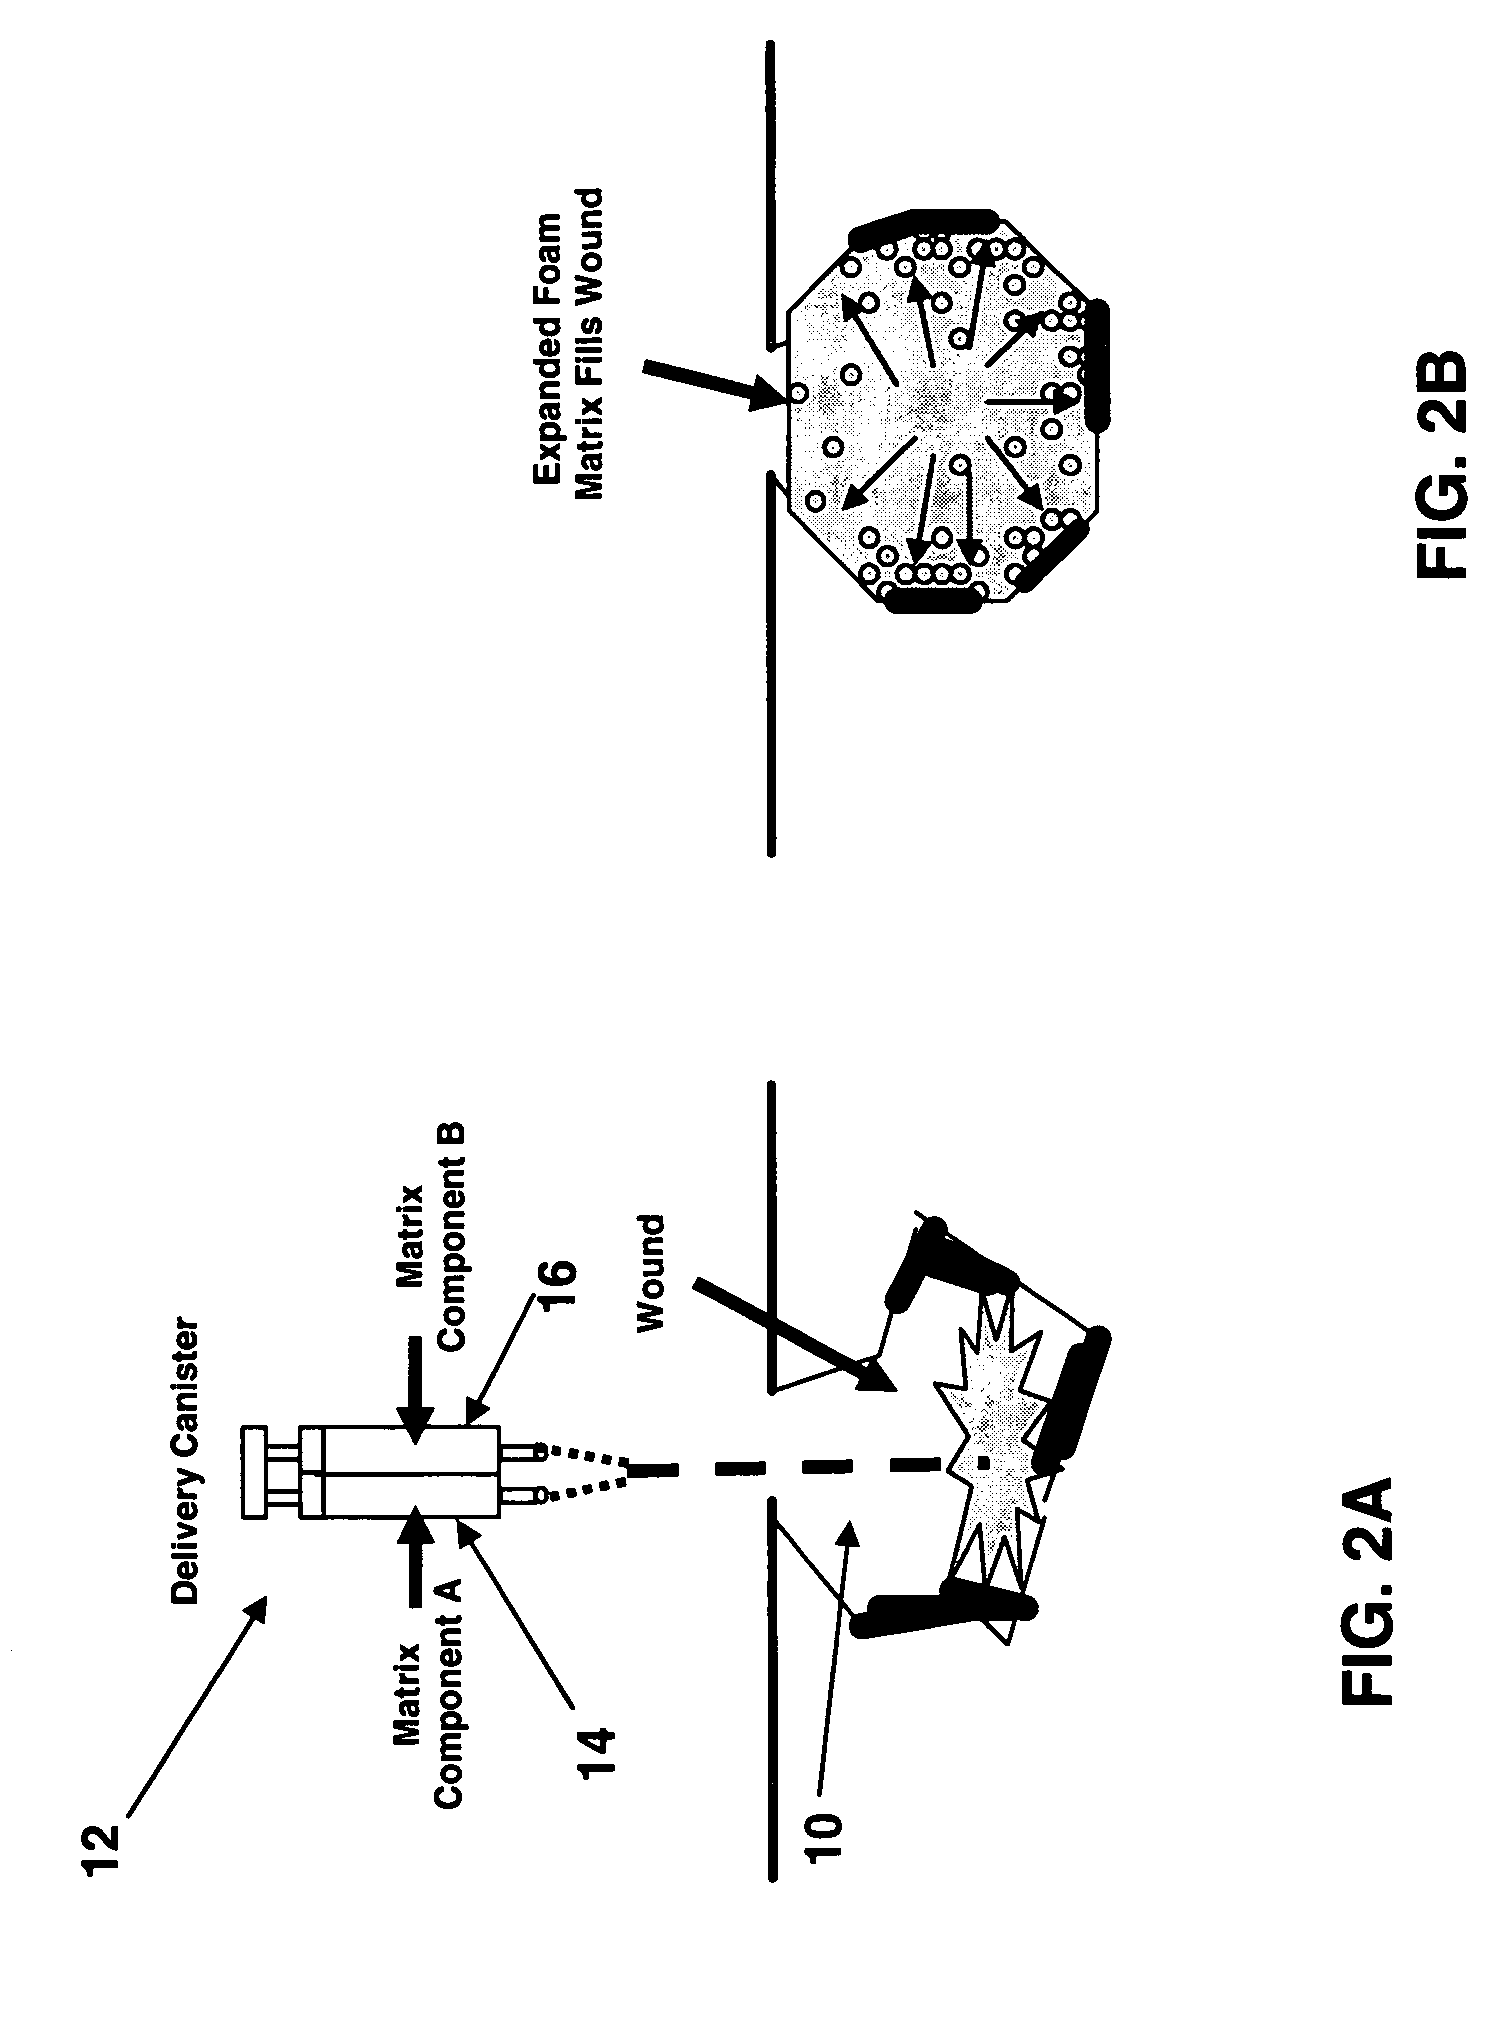 Method and composition for in situ formation of an artificial blockage to control bleeding